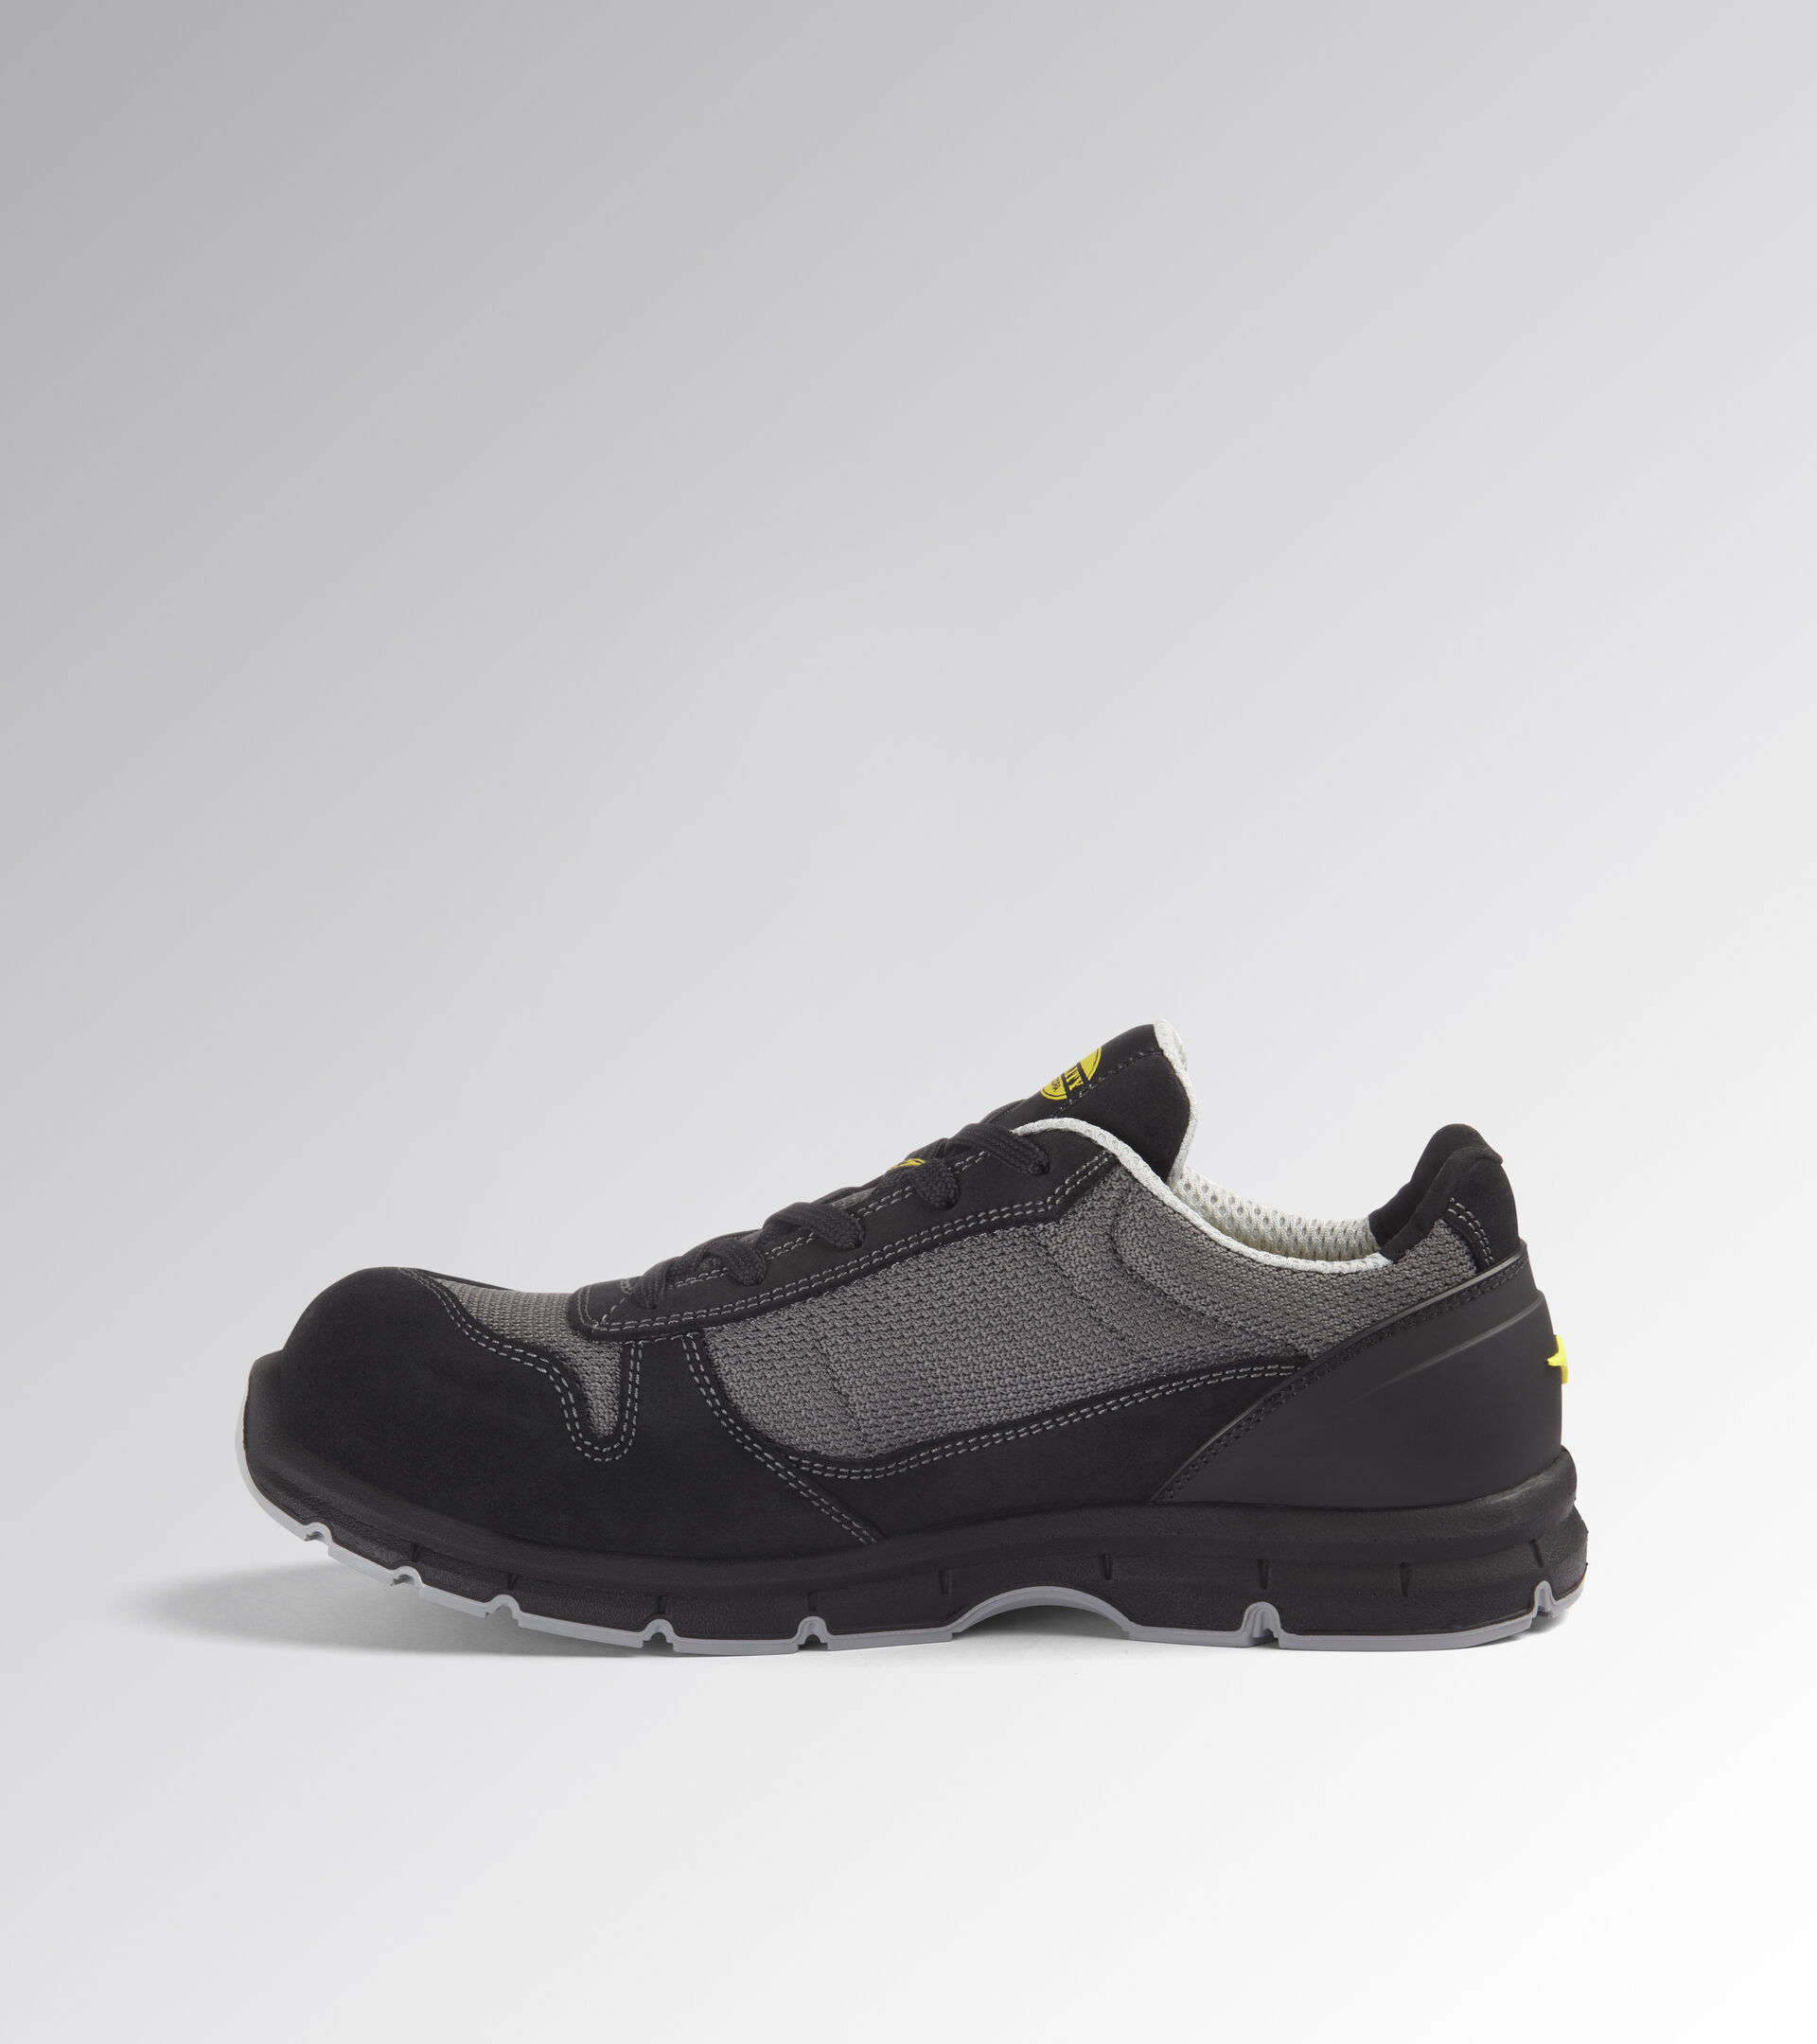 Low safety shoe RUN TEXT LOW MET FREE S1PL FO SR ESD BLACK /CHARCOAL GRAY - Utility